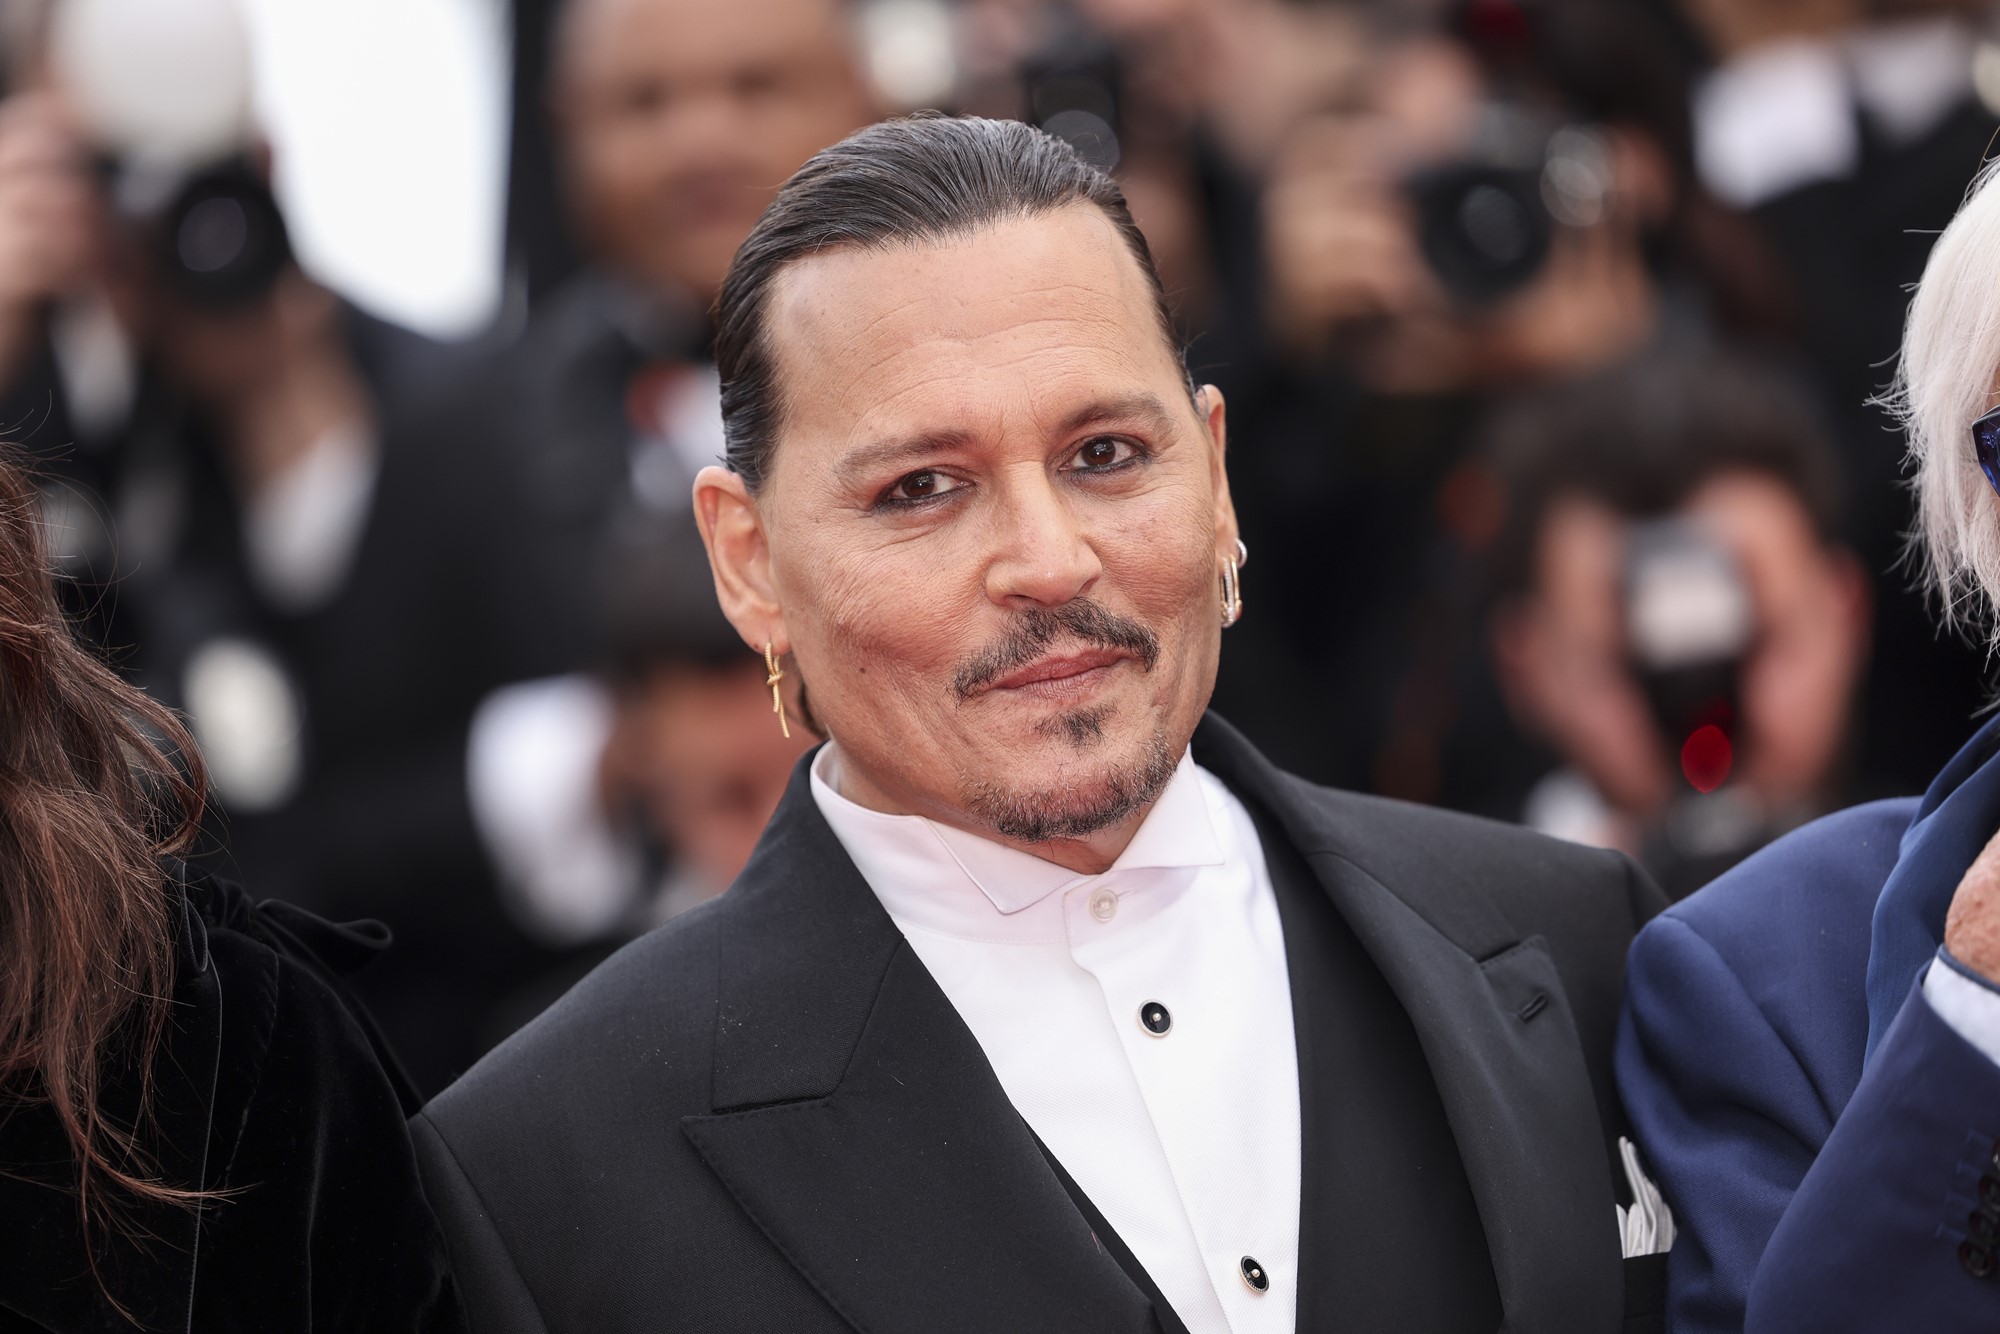 Actor Johnny Depp in a suit and collared shirt, smiling without teeth with photographers behind him